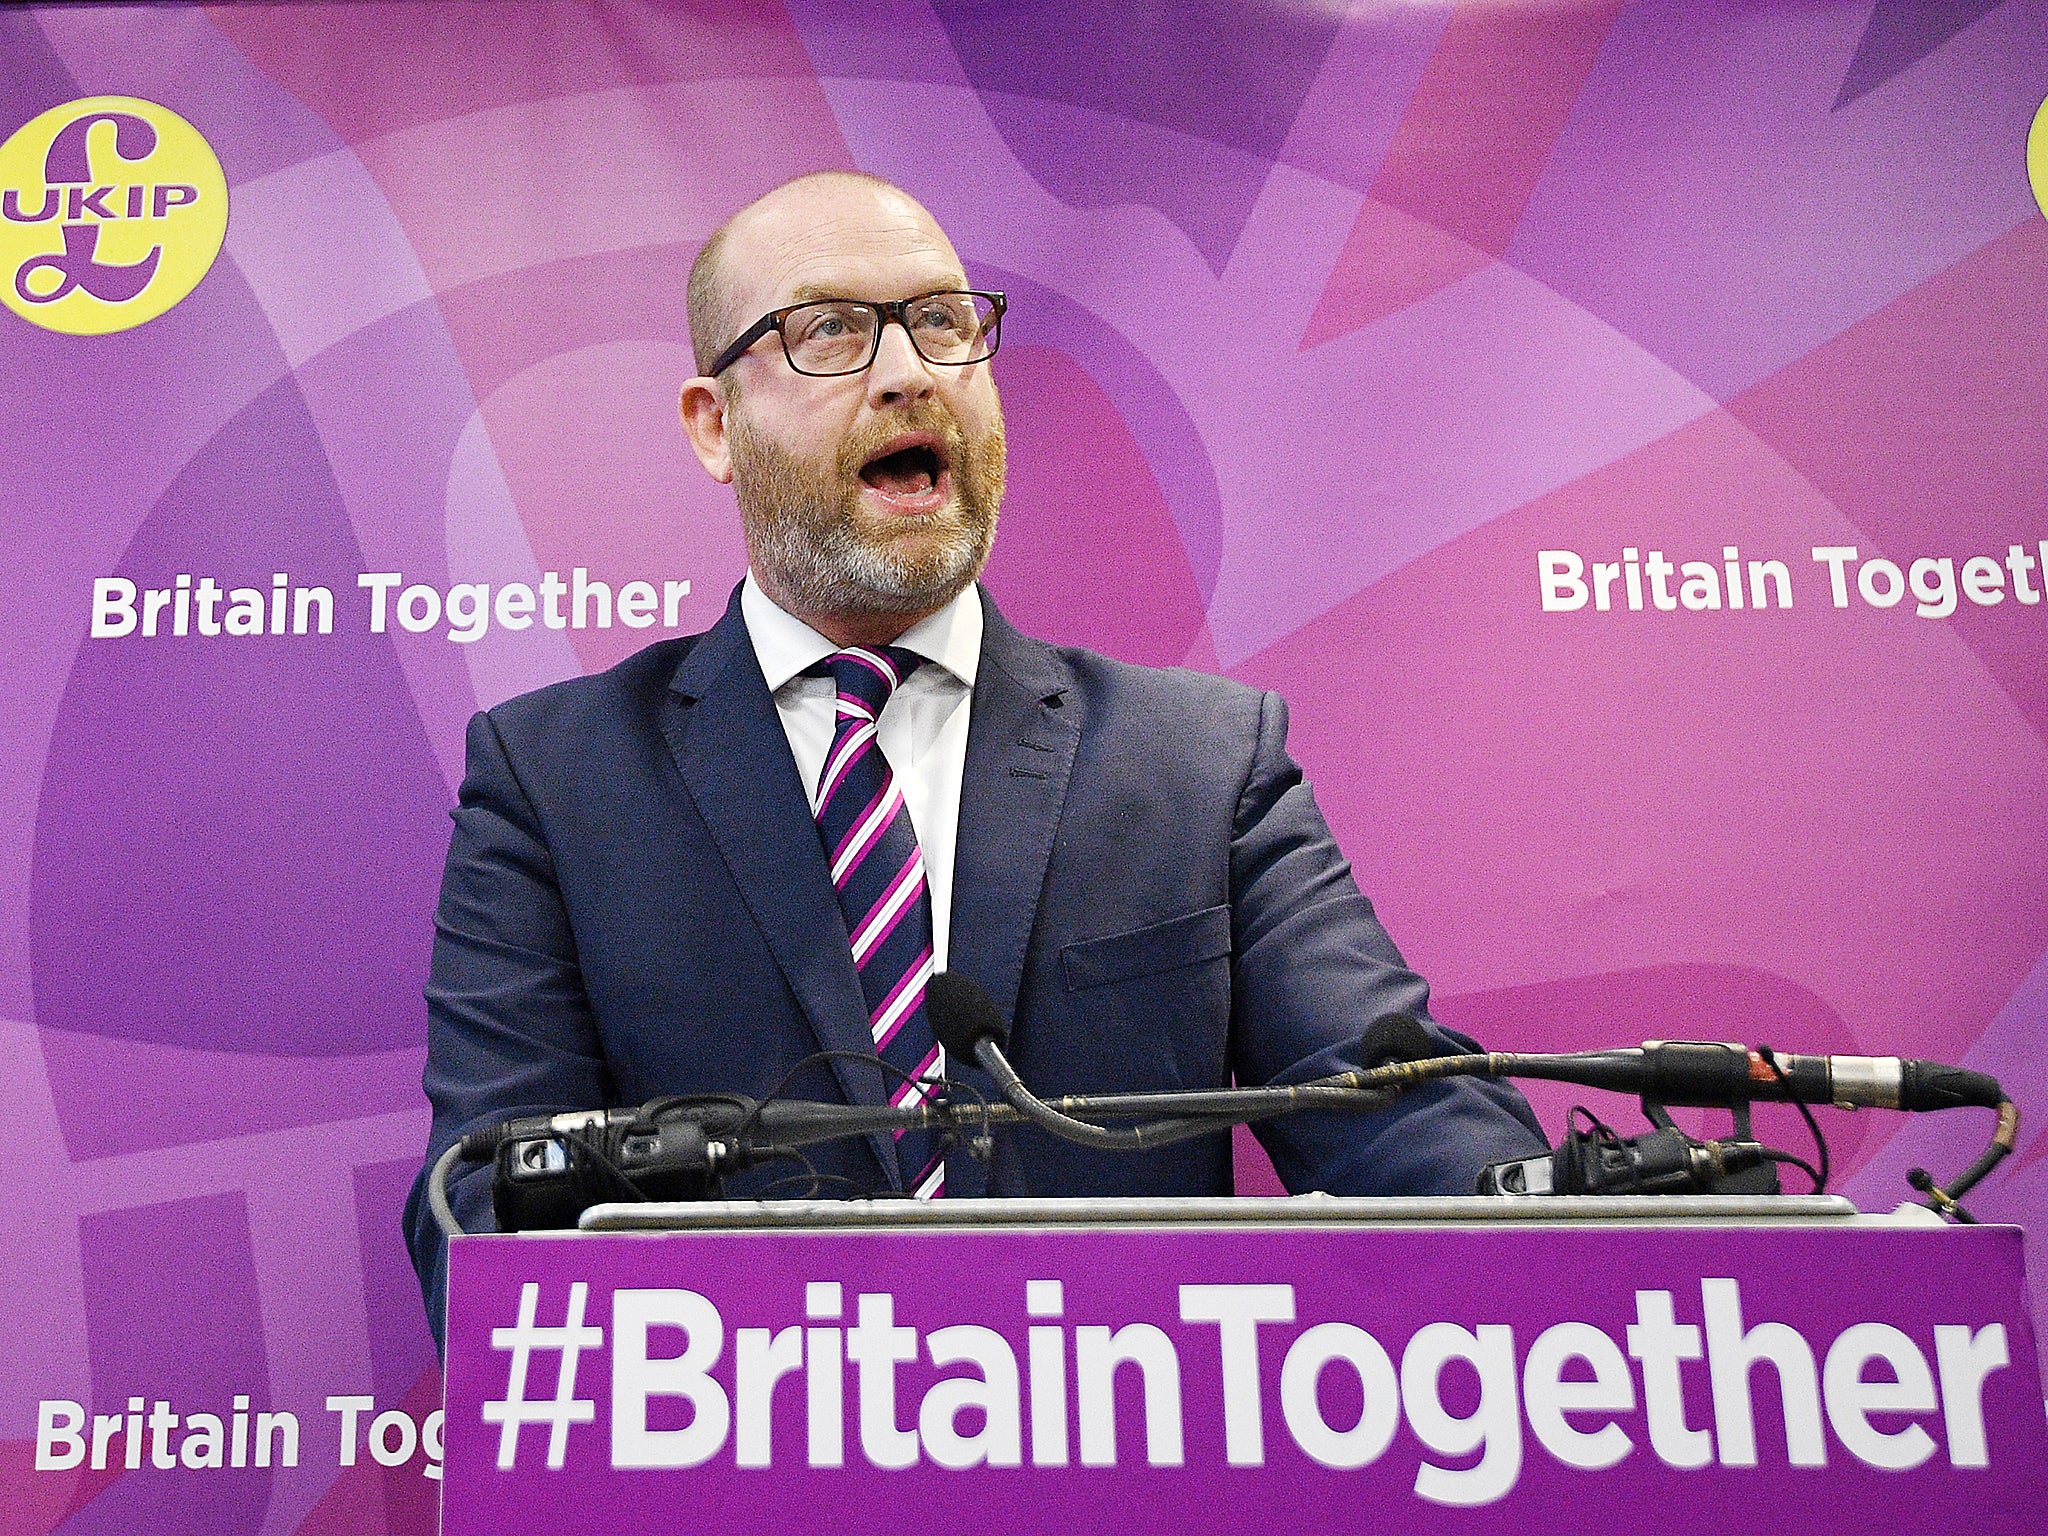 United Kingdom Independence Party (UKIP) leader Paul Nuttall speaks to reporters at their manifesto launch during a campaign event in central London